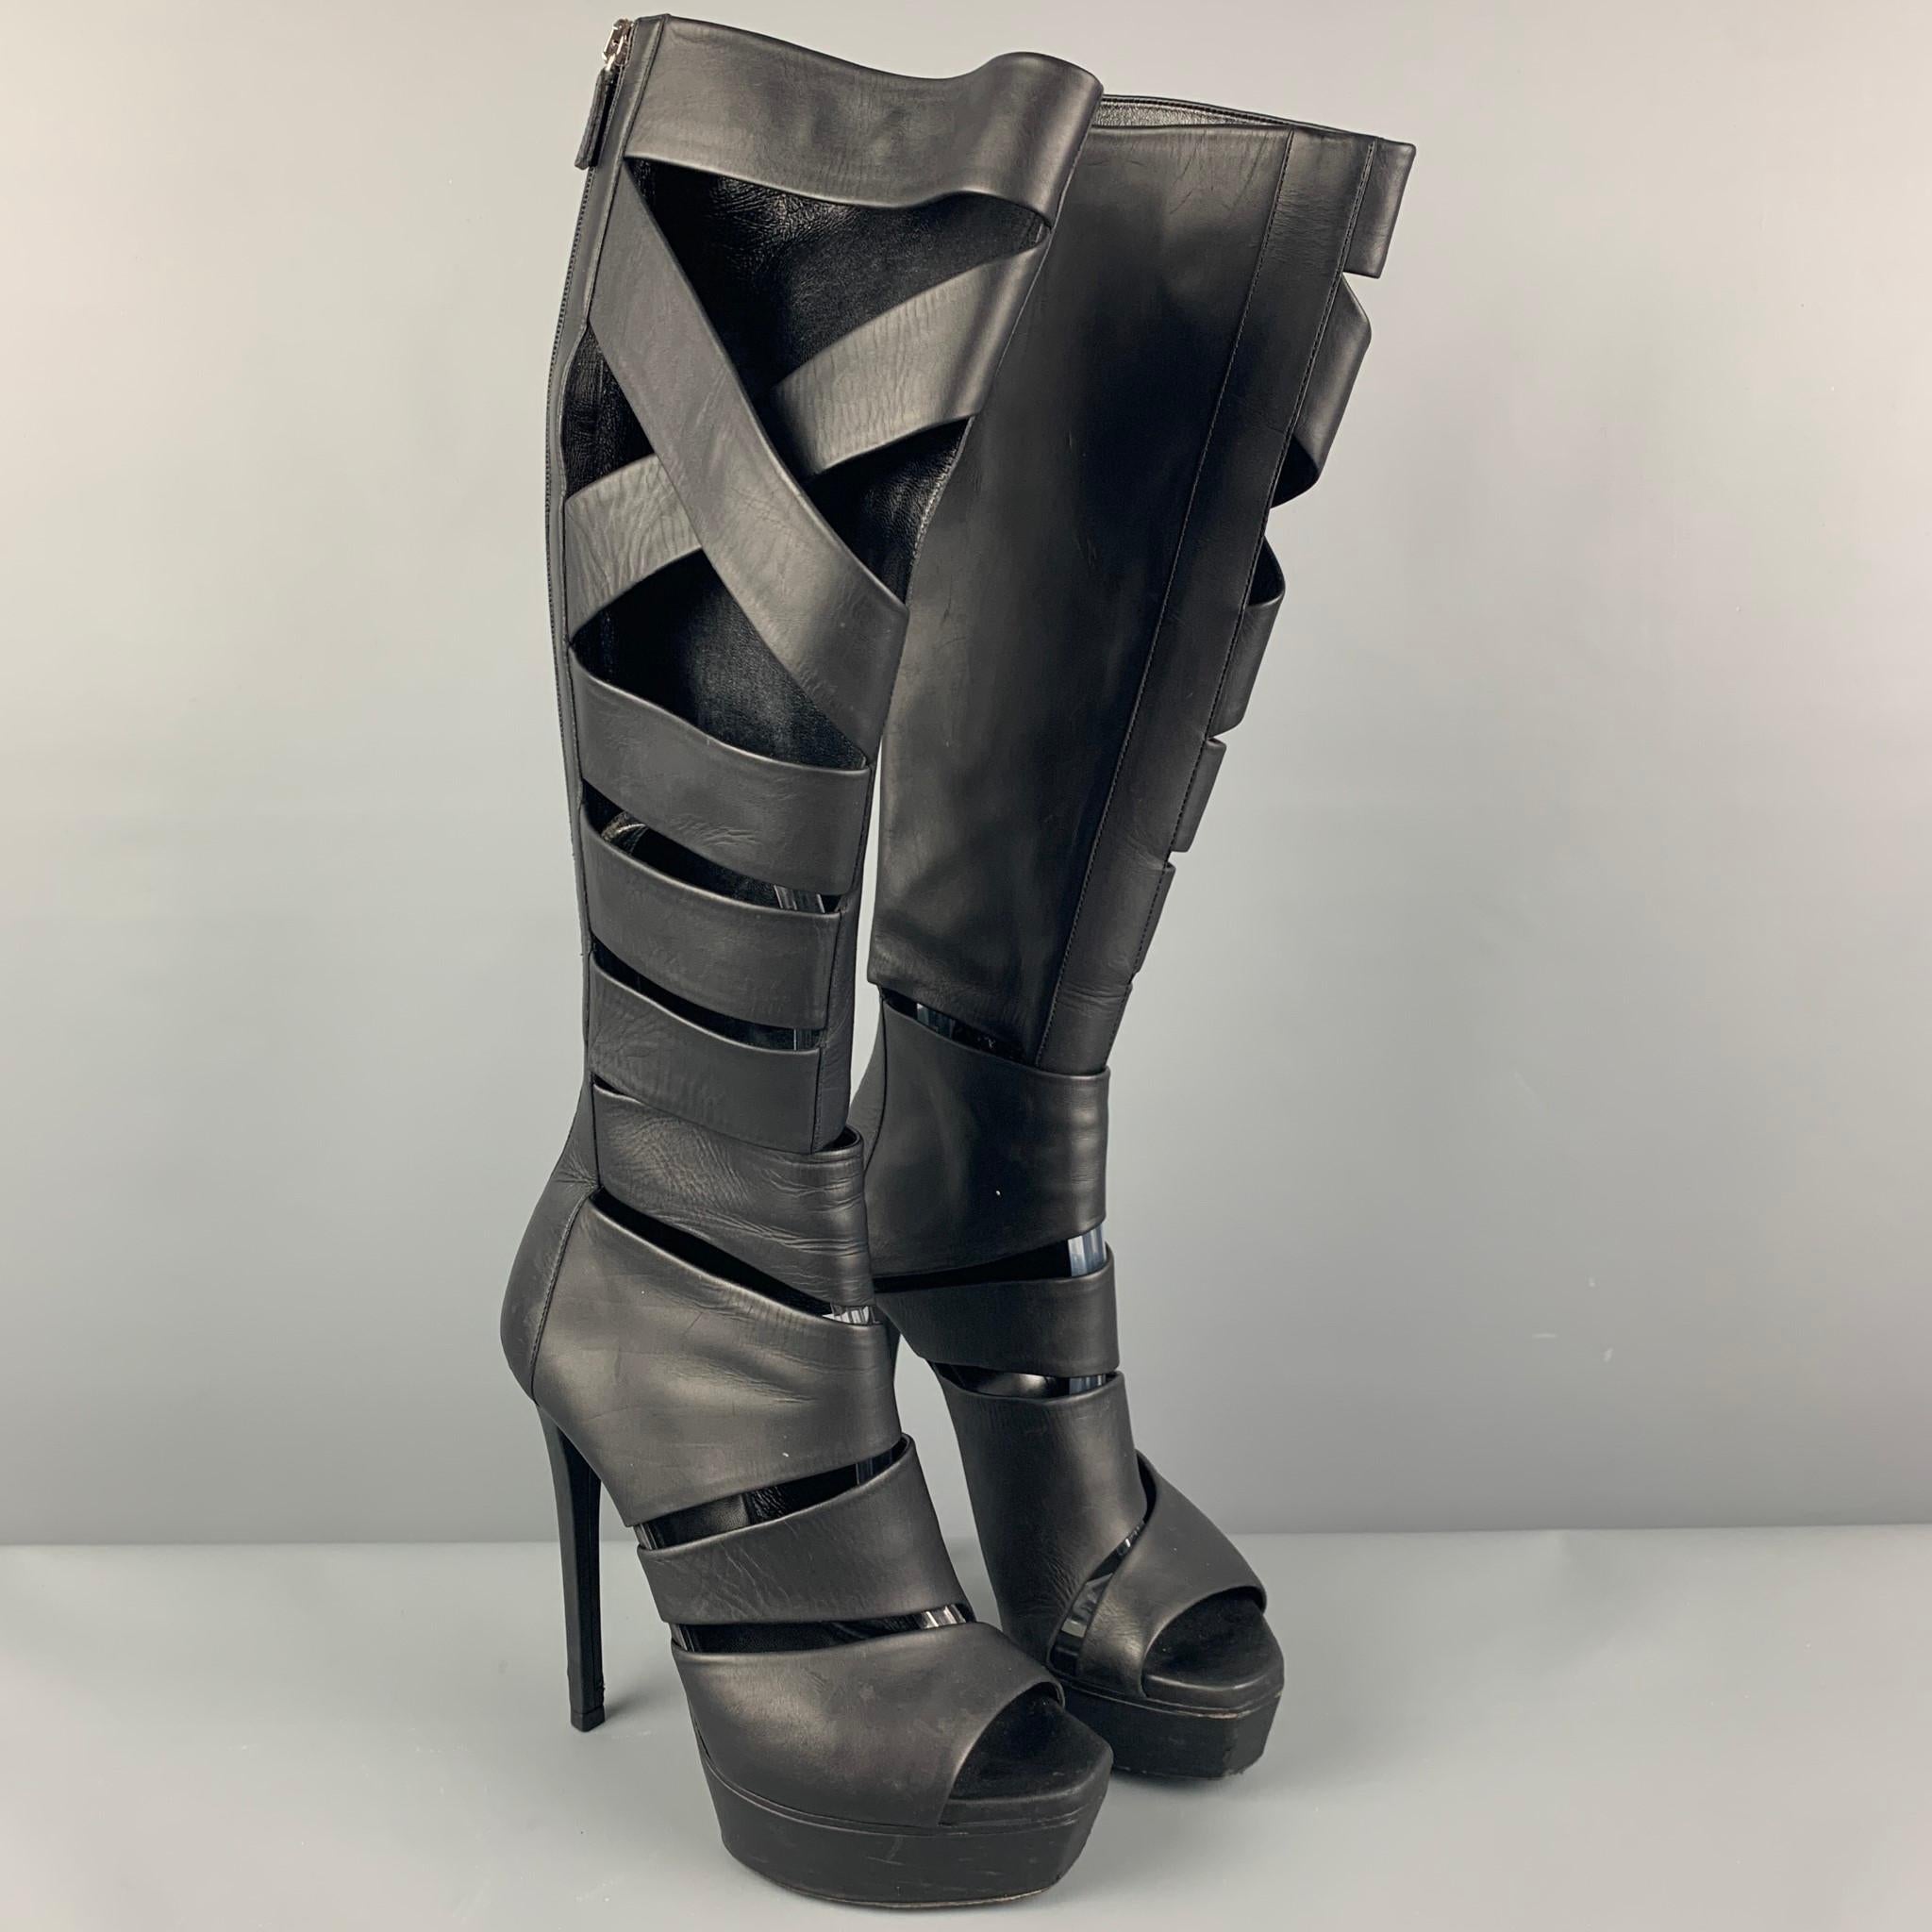 GUCCI 'Helena' boots comes in a black leather featuring cut-out designs, knee high, platform, and a stiletto heel. Made in Italy. 

Very Good Pre-Owned Condition.
Marked: 36
Original Retail Price: $1,650.00

Measurements:

Heel: 5 in.
Platform: 1